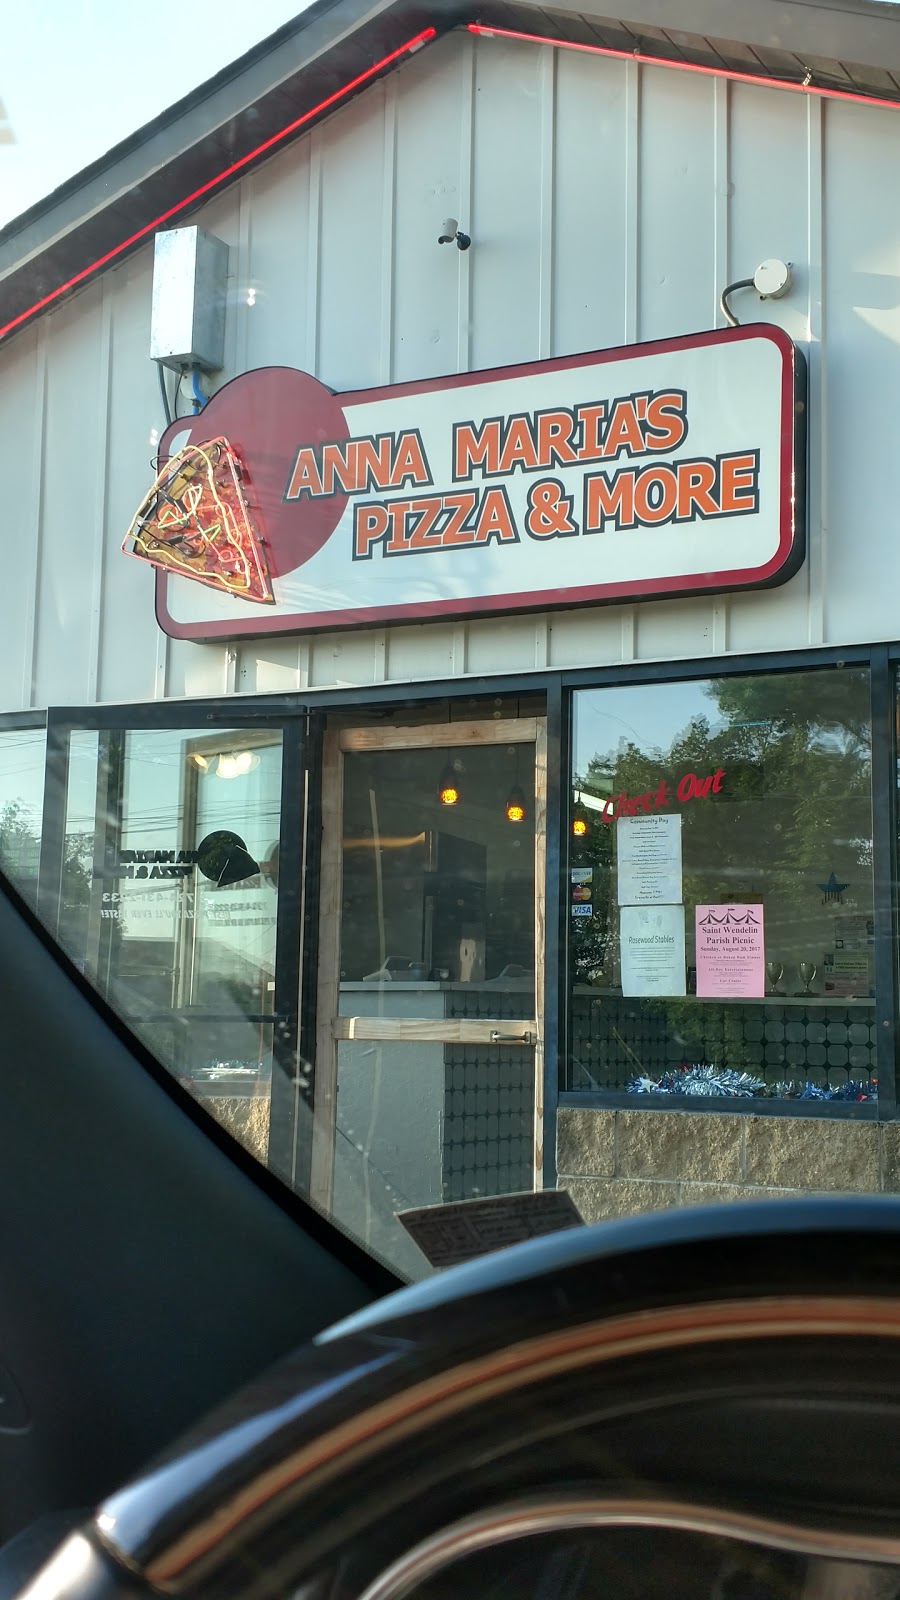 Anna Marias Pizza and More | 113 Freeport Rd, Butler, PA 16002, USA | Phone: (724) 431-2233